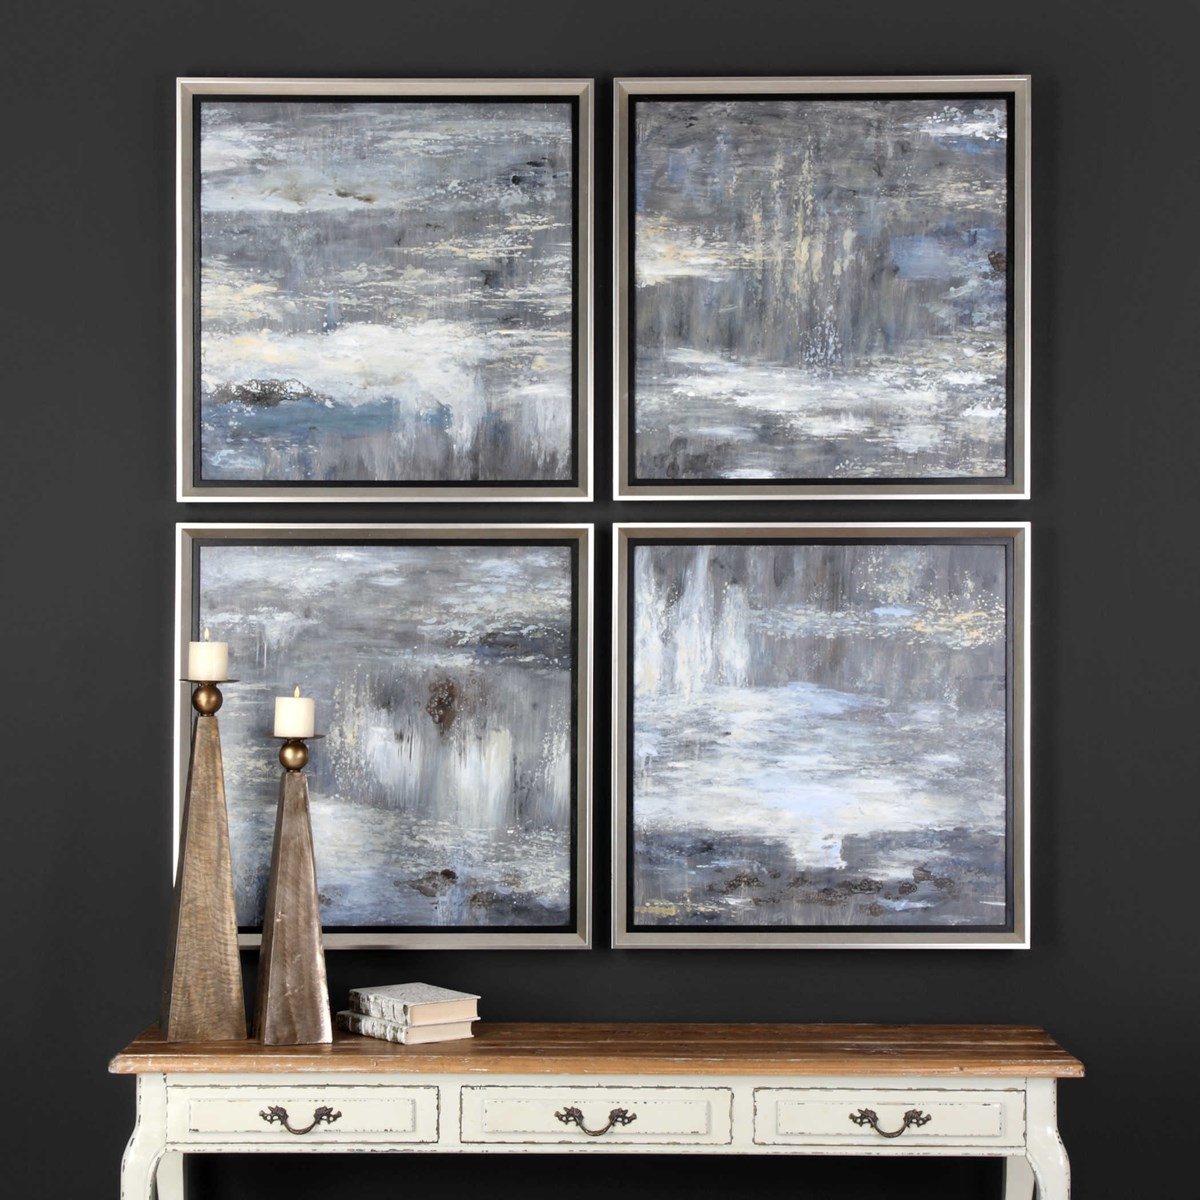 Shades of Gray Hand Painted Canvases, 33" x 33", Set of 4 - Image 1